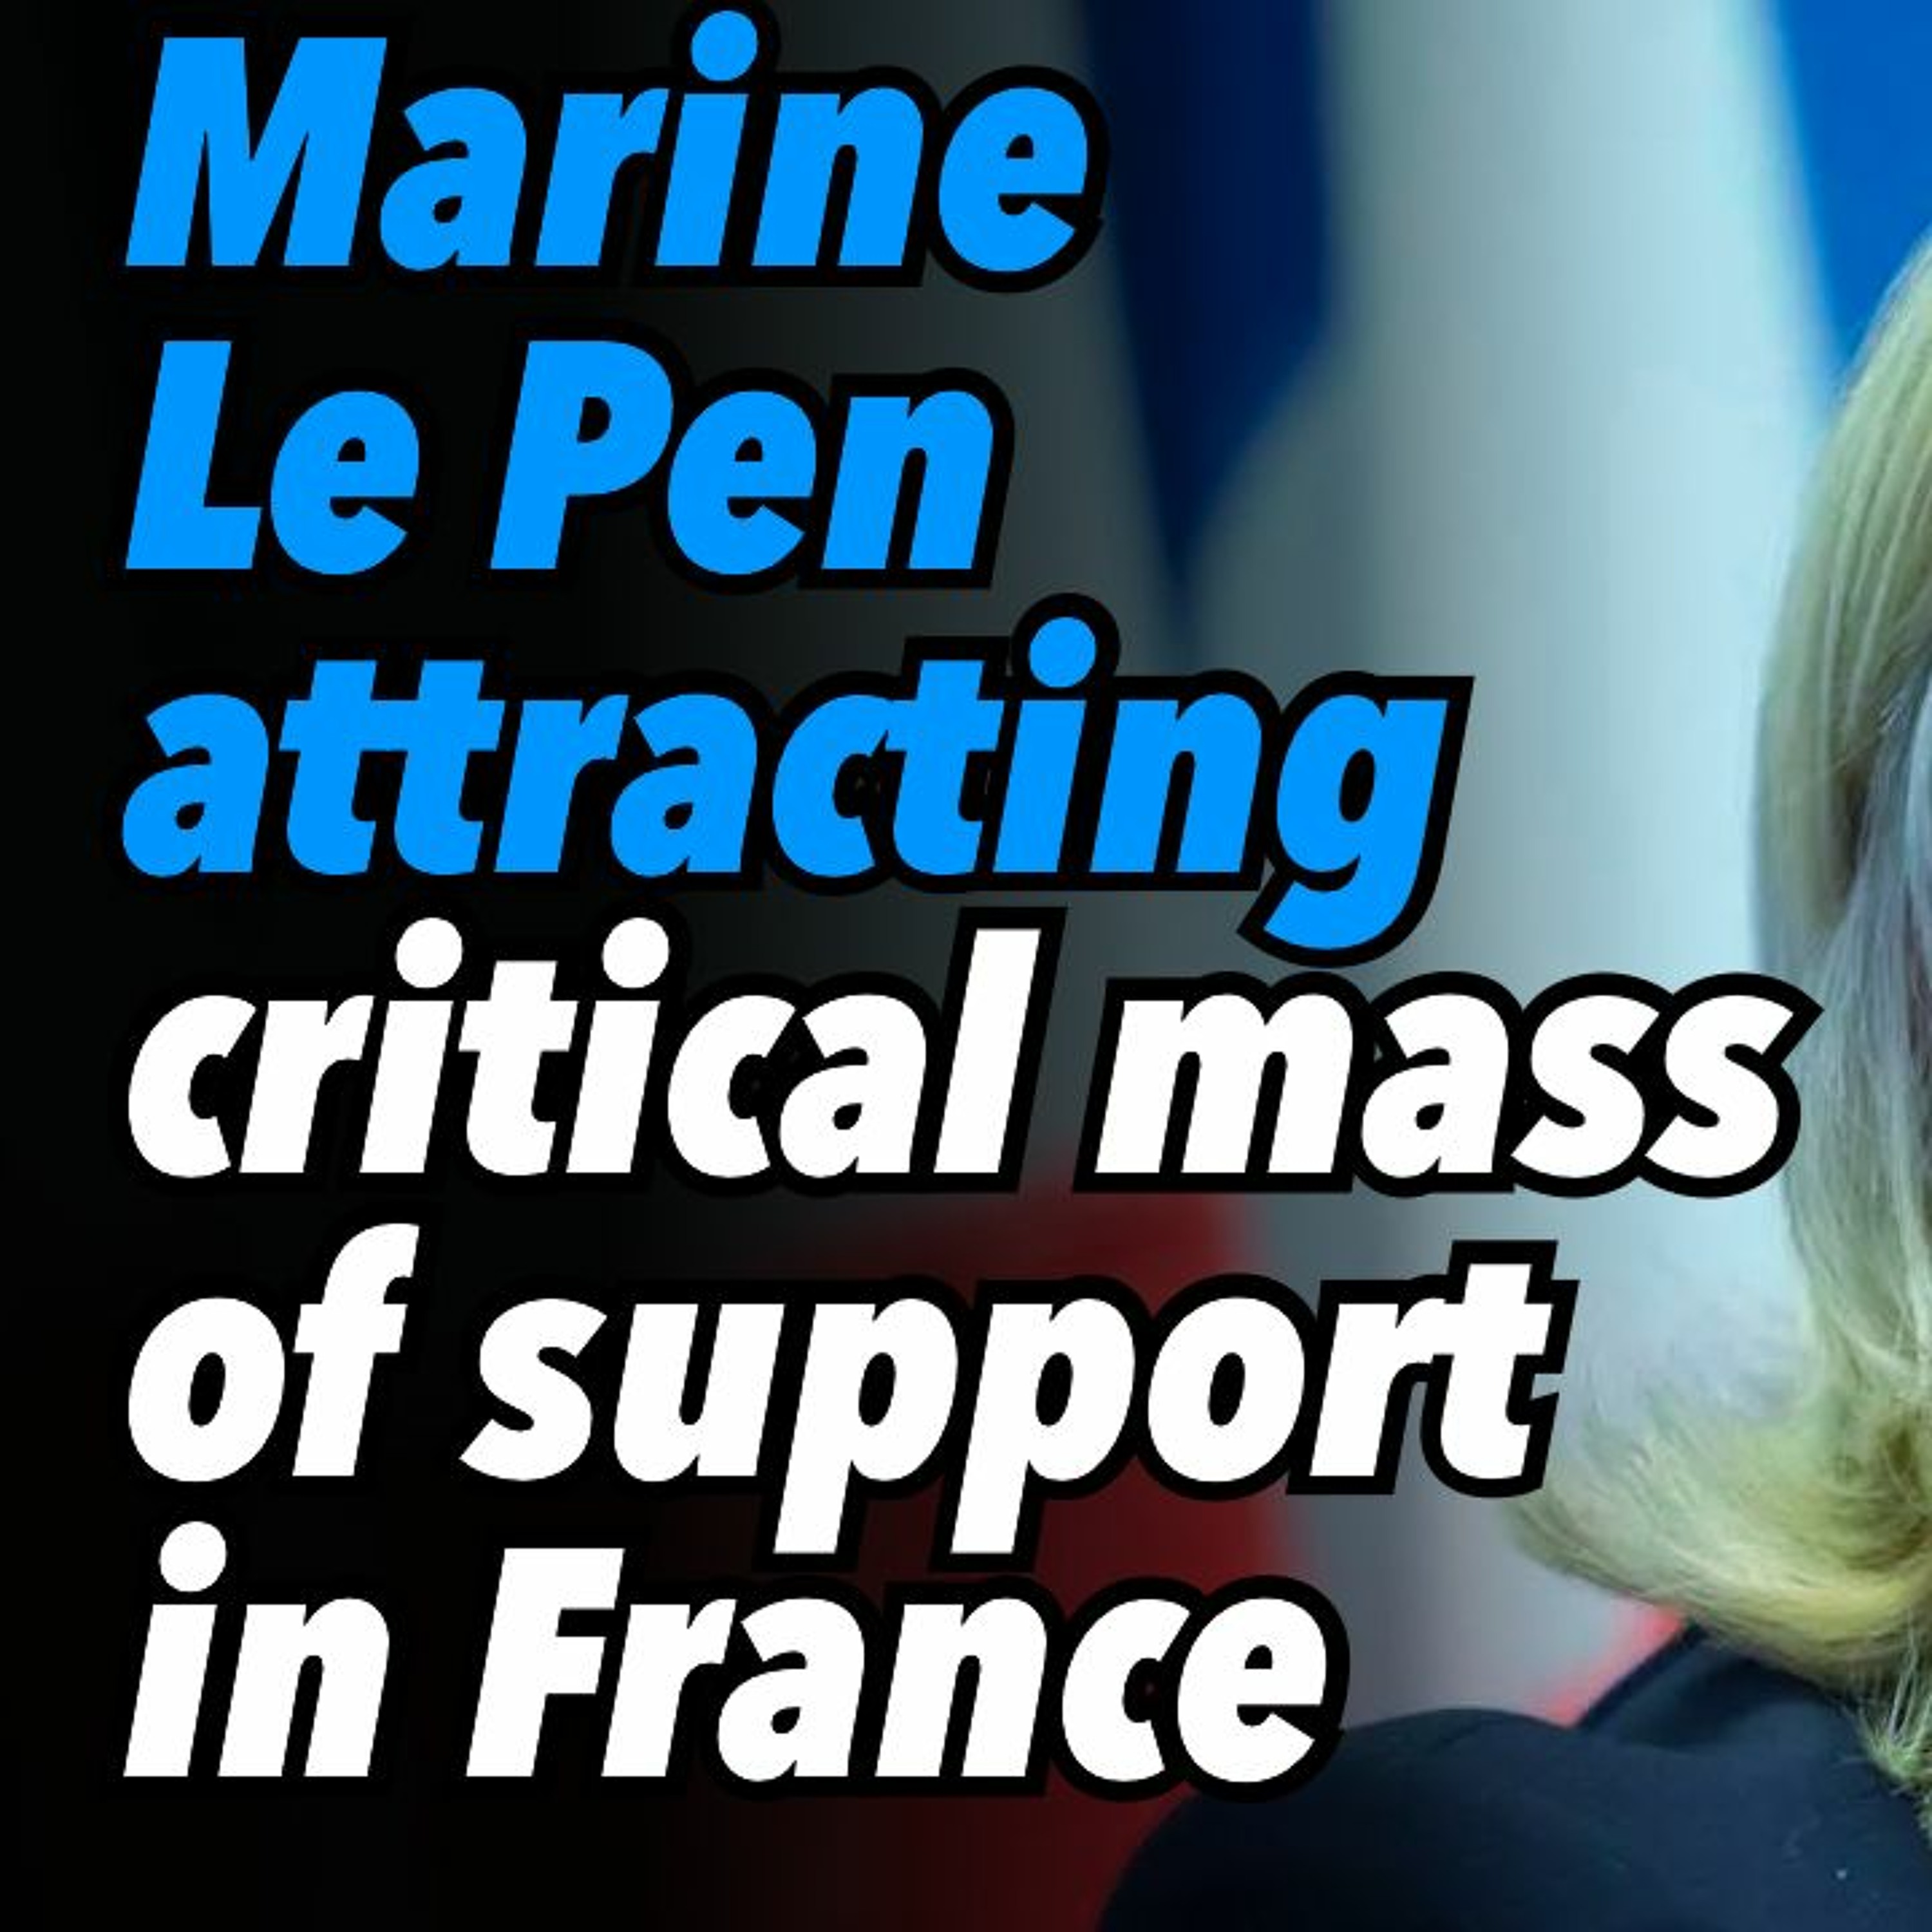 Marine Le Pen attracting critical mass of support in France